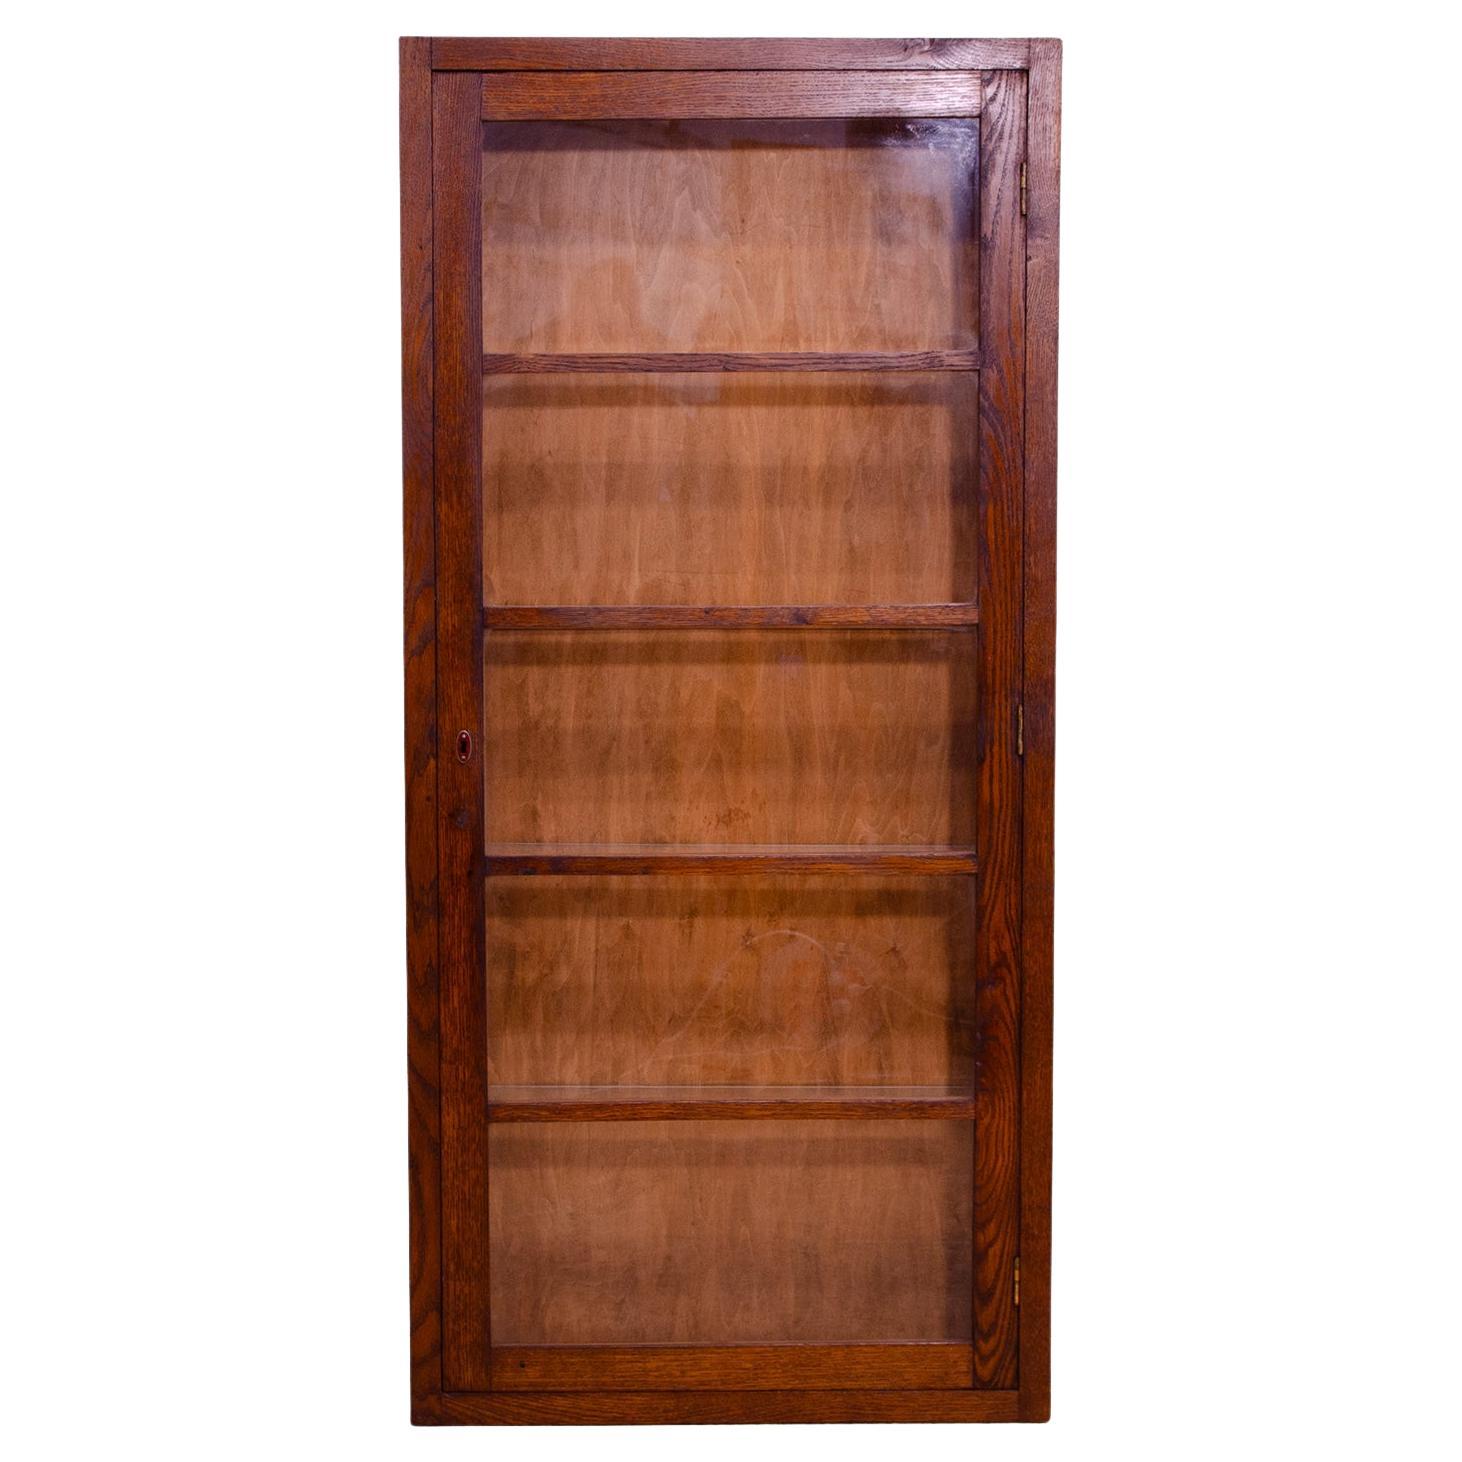 This narrow Functionalism display case was produced in the 1930s in the former Czechoslovakia. Material oak. The showcase is very practical and easy to handle due to its dimensions. It is also suitable as a bookcase, it can be placed in the space.